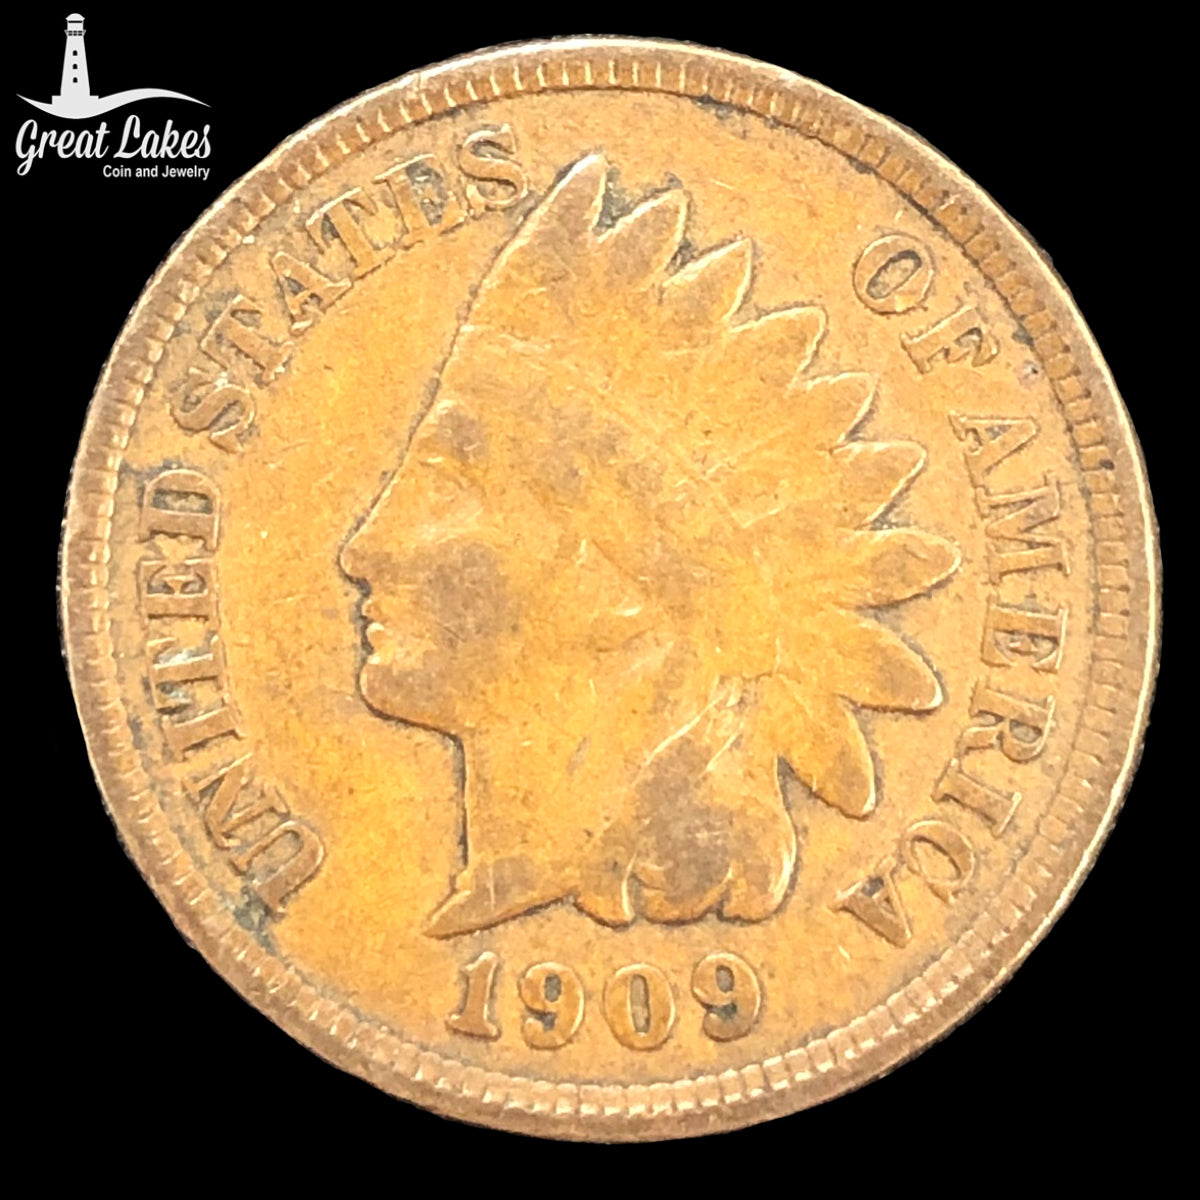 1909 Indian Head Cent (F)